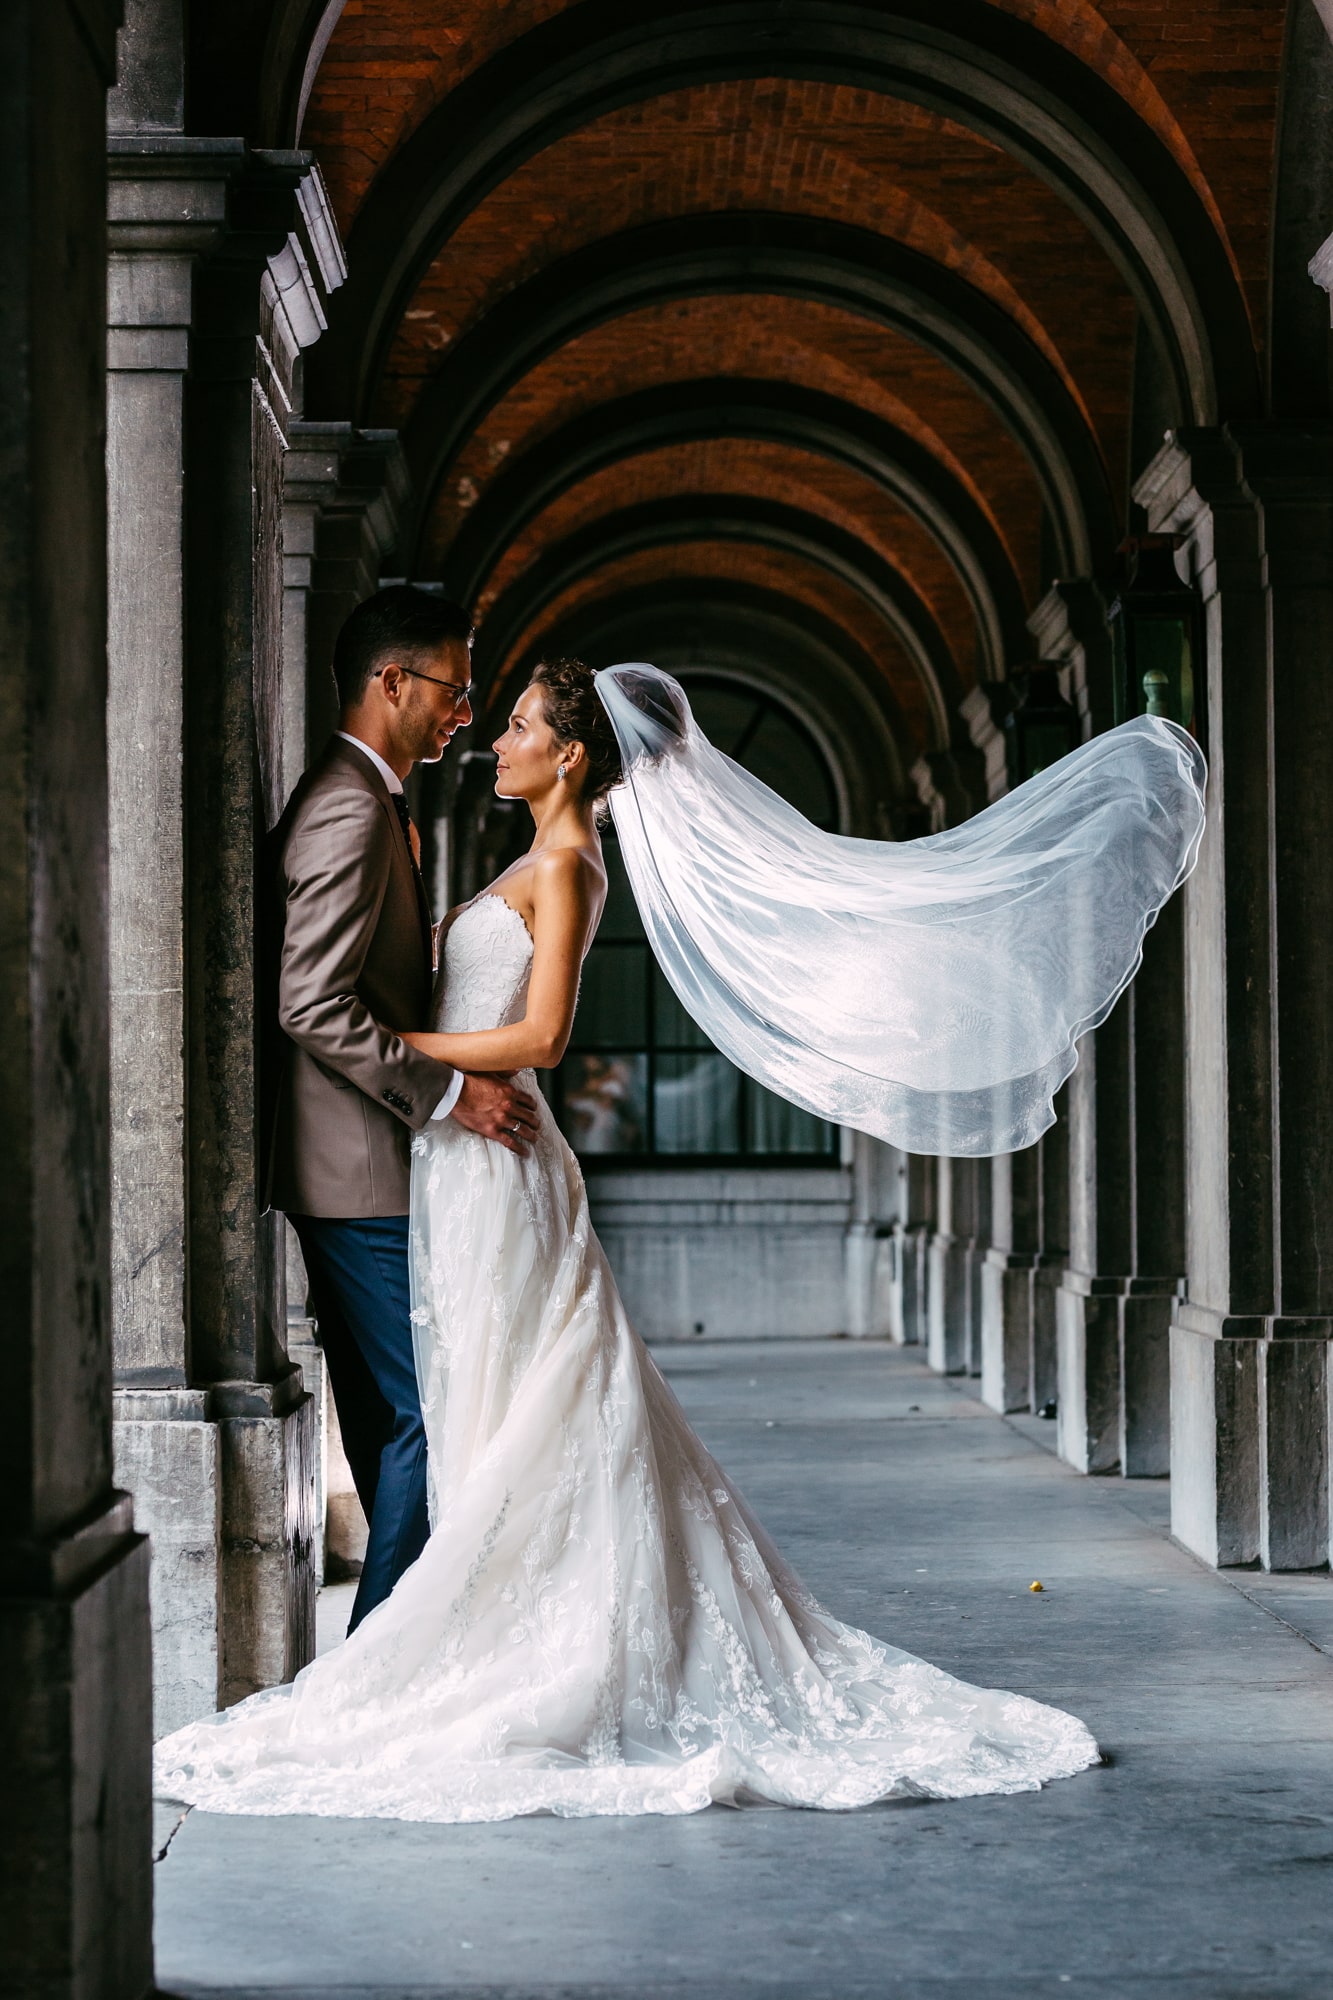 A bride and groom, captured in beautiful wedding photography, pose under the arches as their veil blows gracefully in the wind.